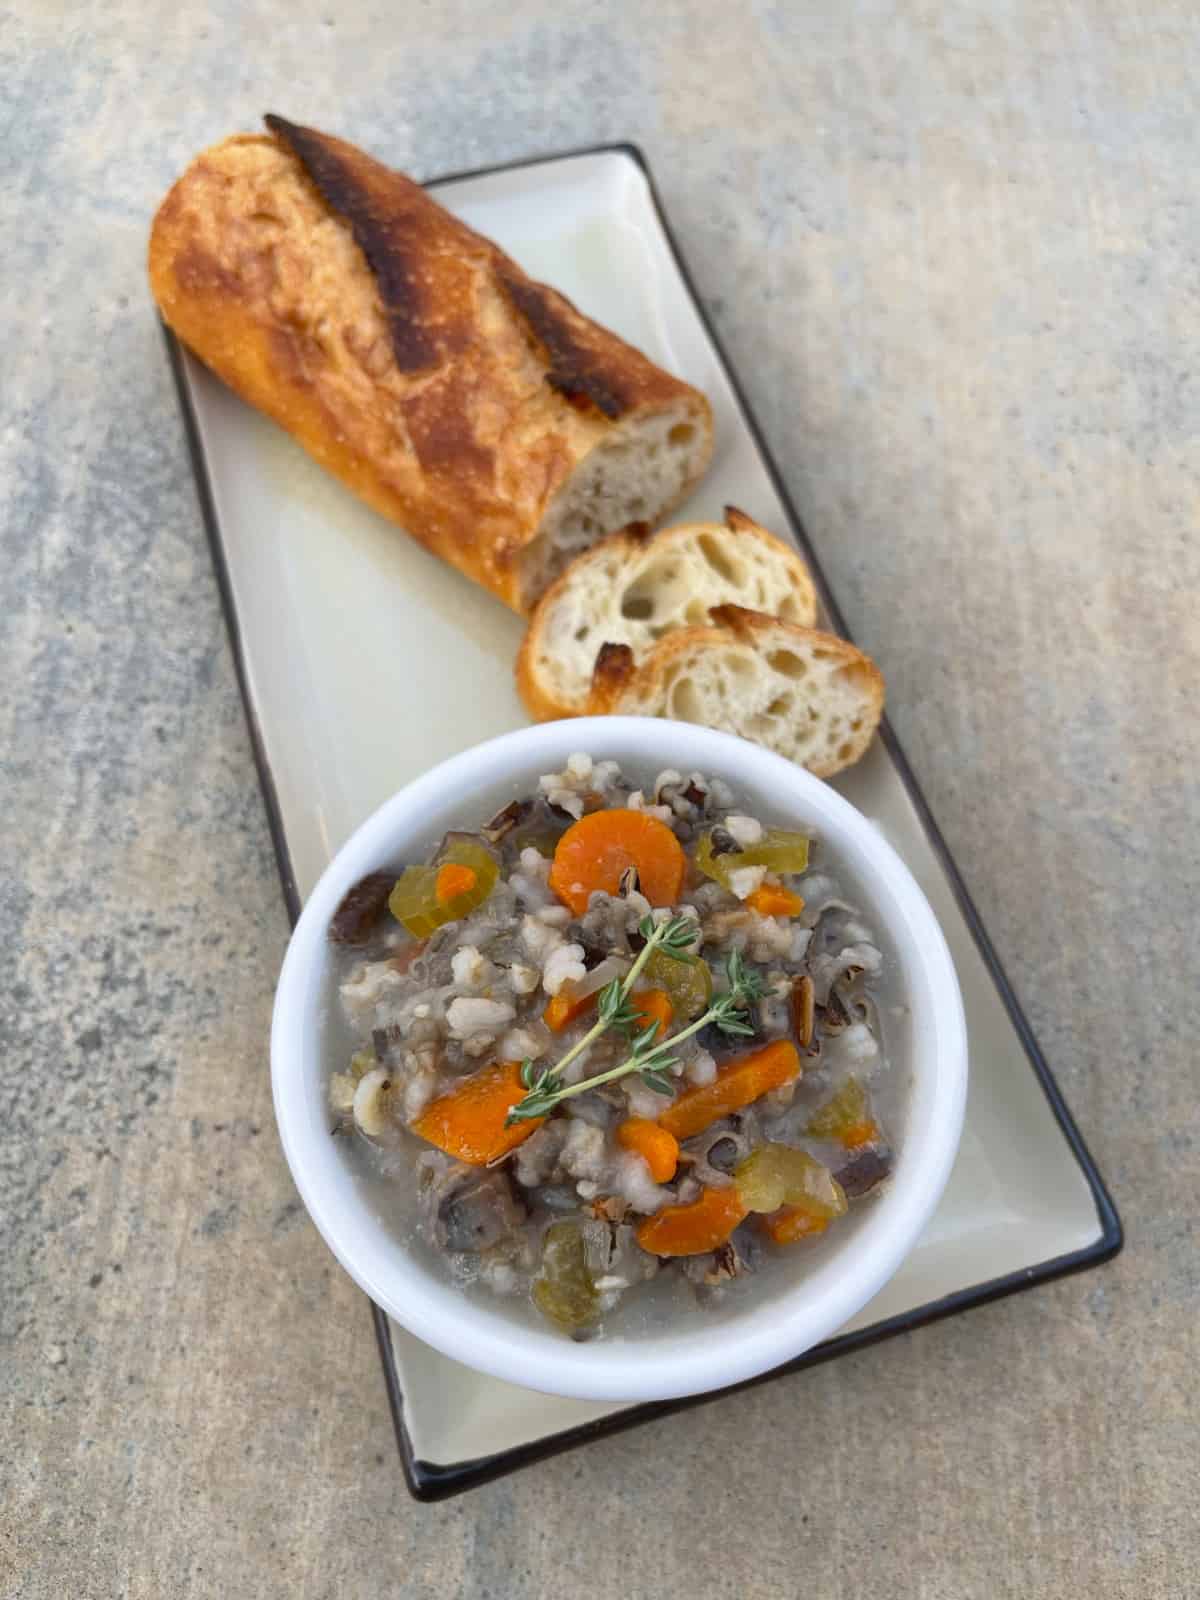 Wild Rice and Mushroom Vegetable Stew in small white bowl on plate with fresh sliced sourdough baguette.